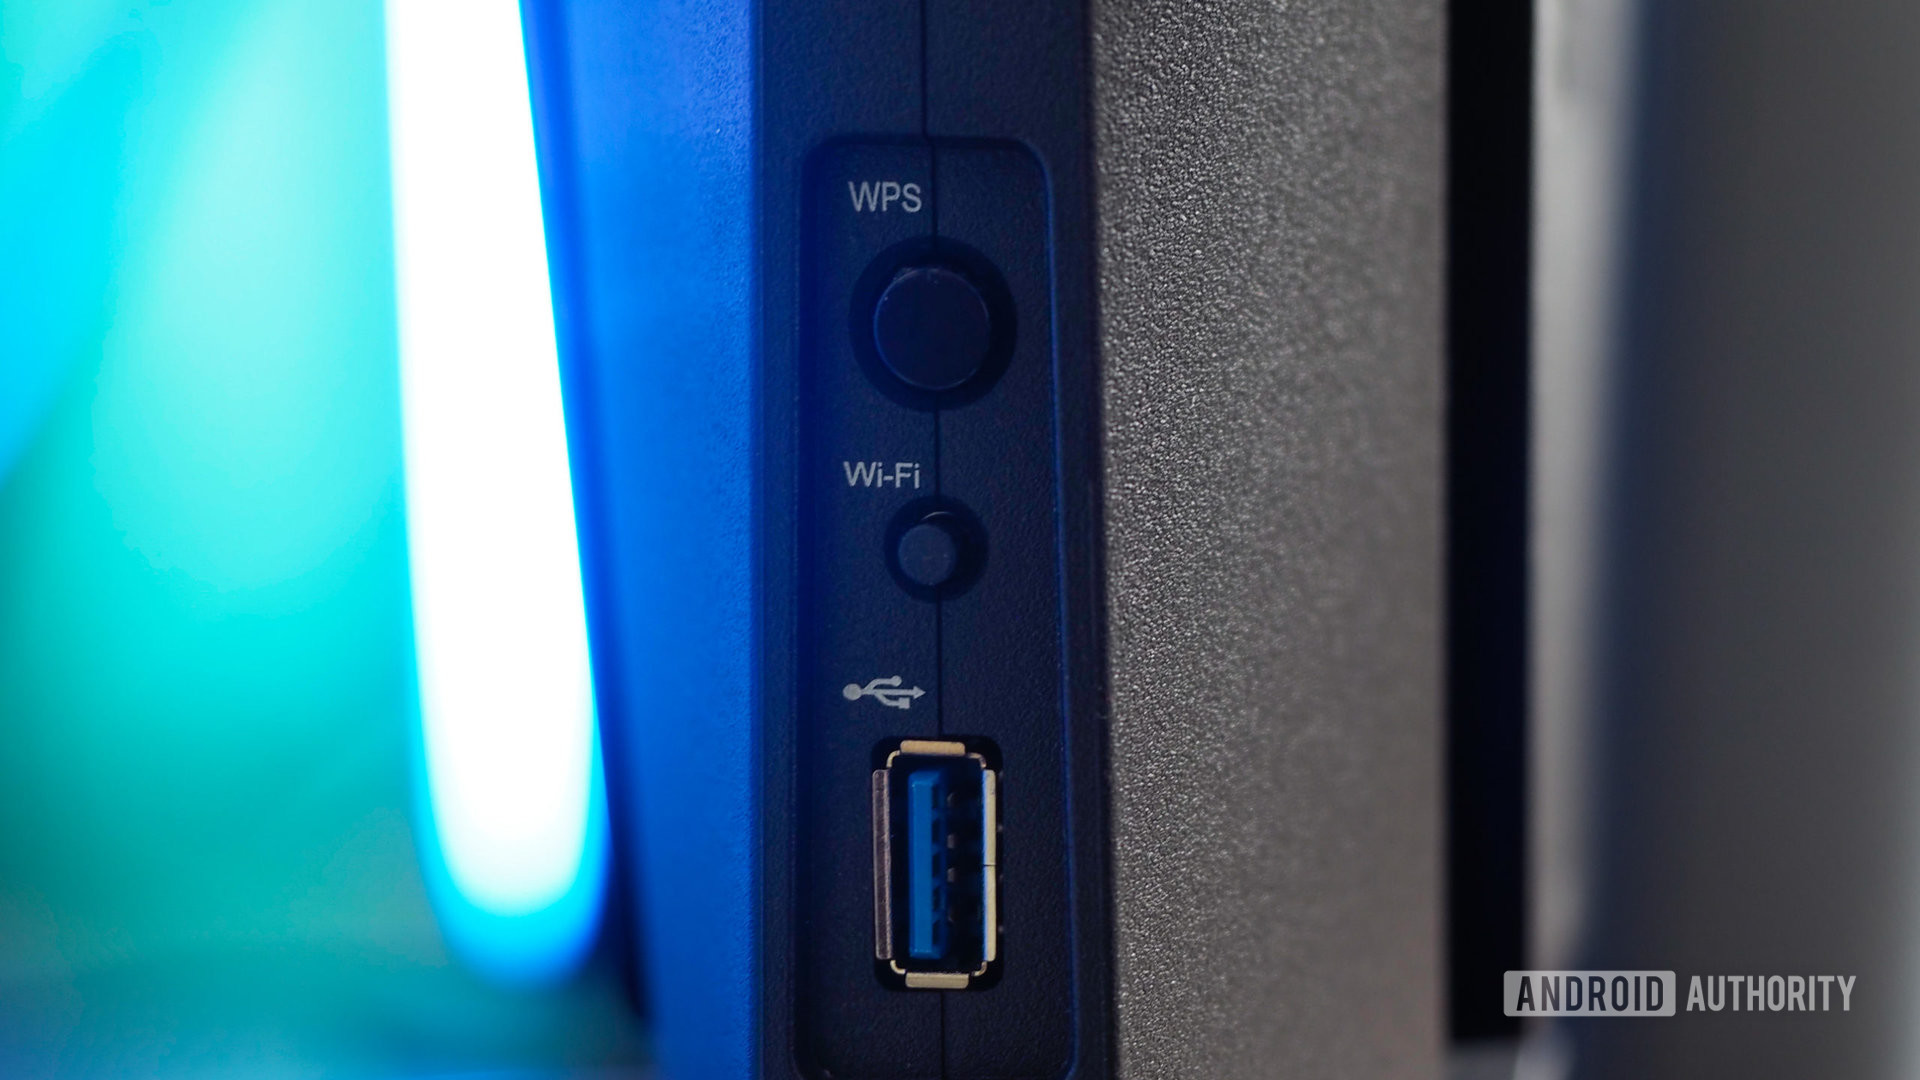 Synology WRX560 router seen from the side, focus on the WPS and Wi-Fi buttons and USB port